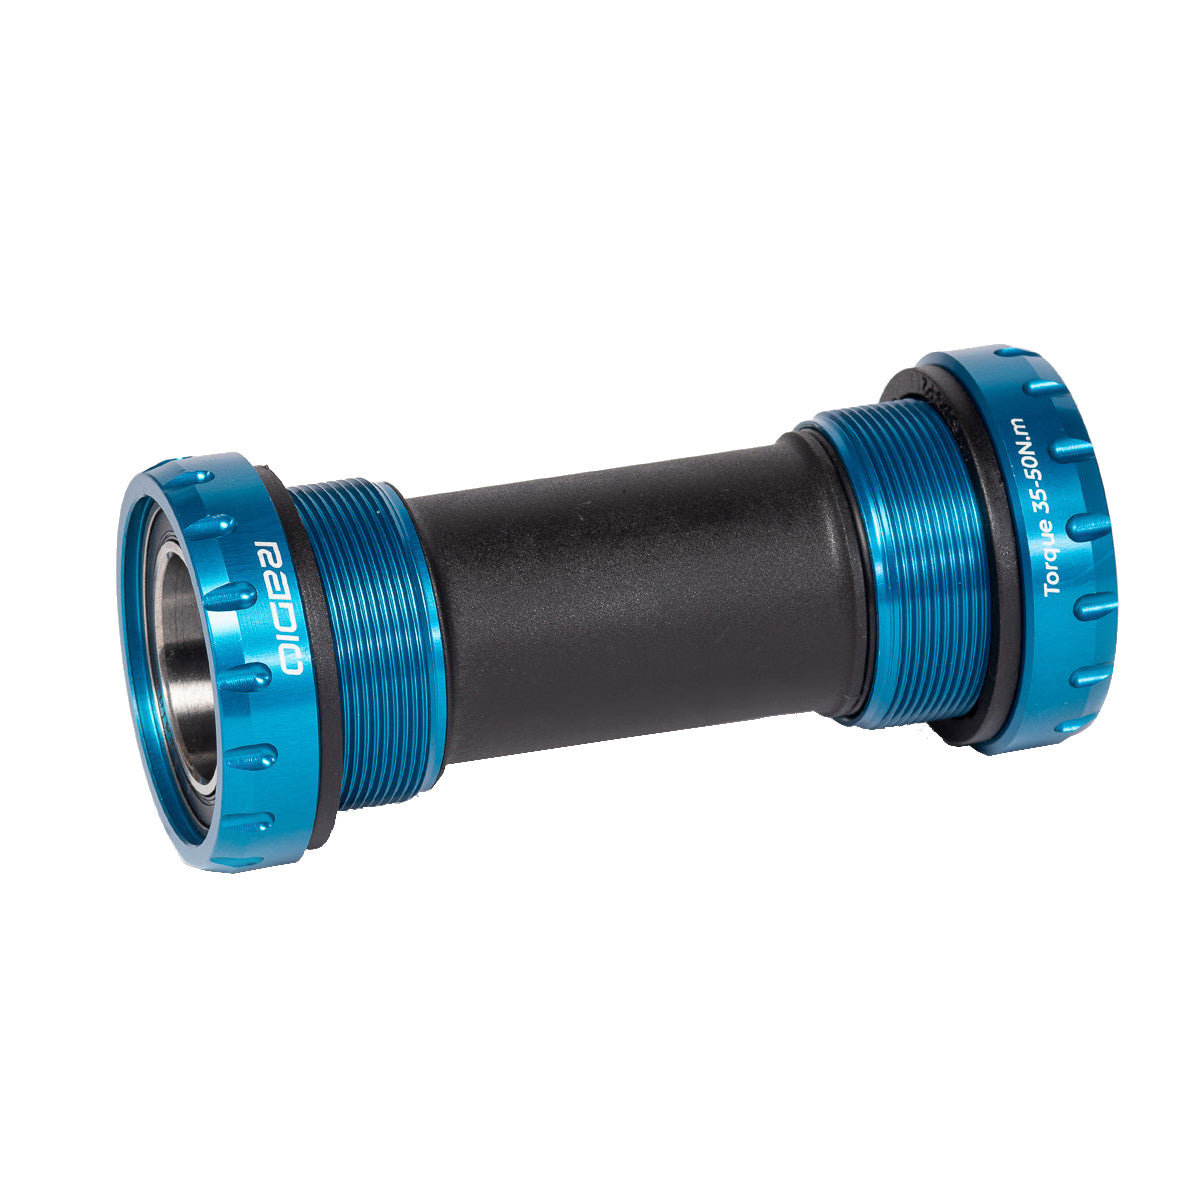 A blue and black bicycle stem with a black sleeve featuring a Radio Raceline External Euro Bottom Bracket.